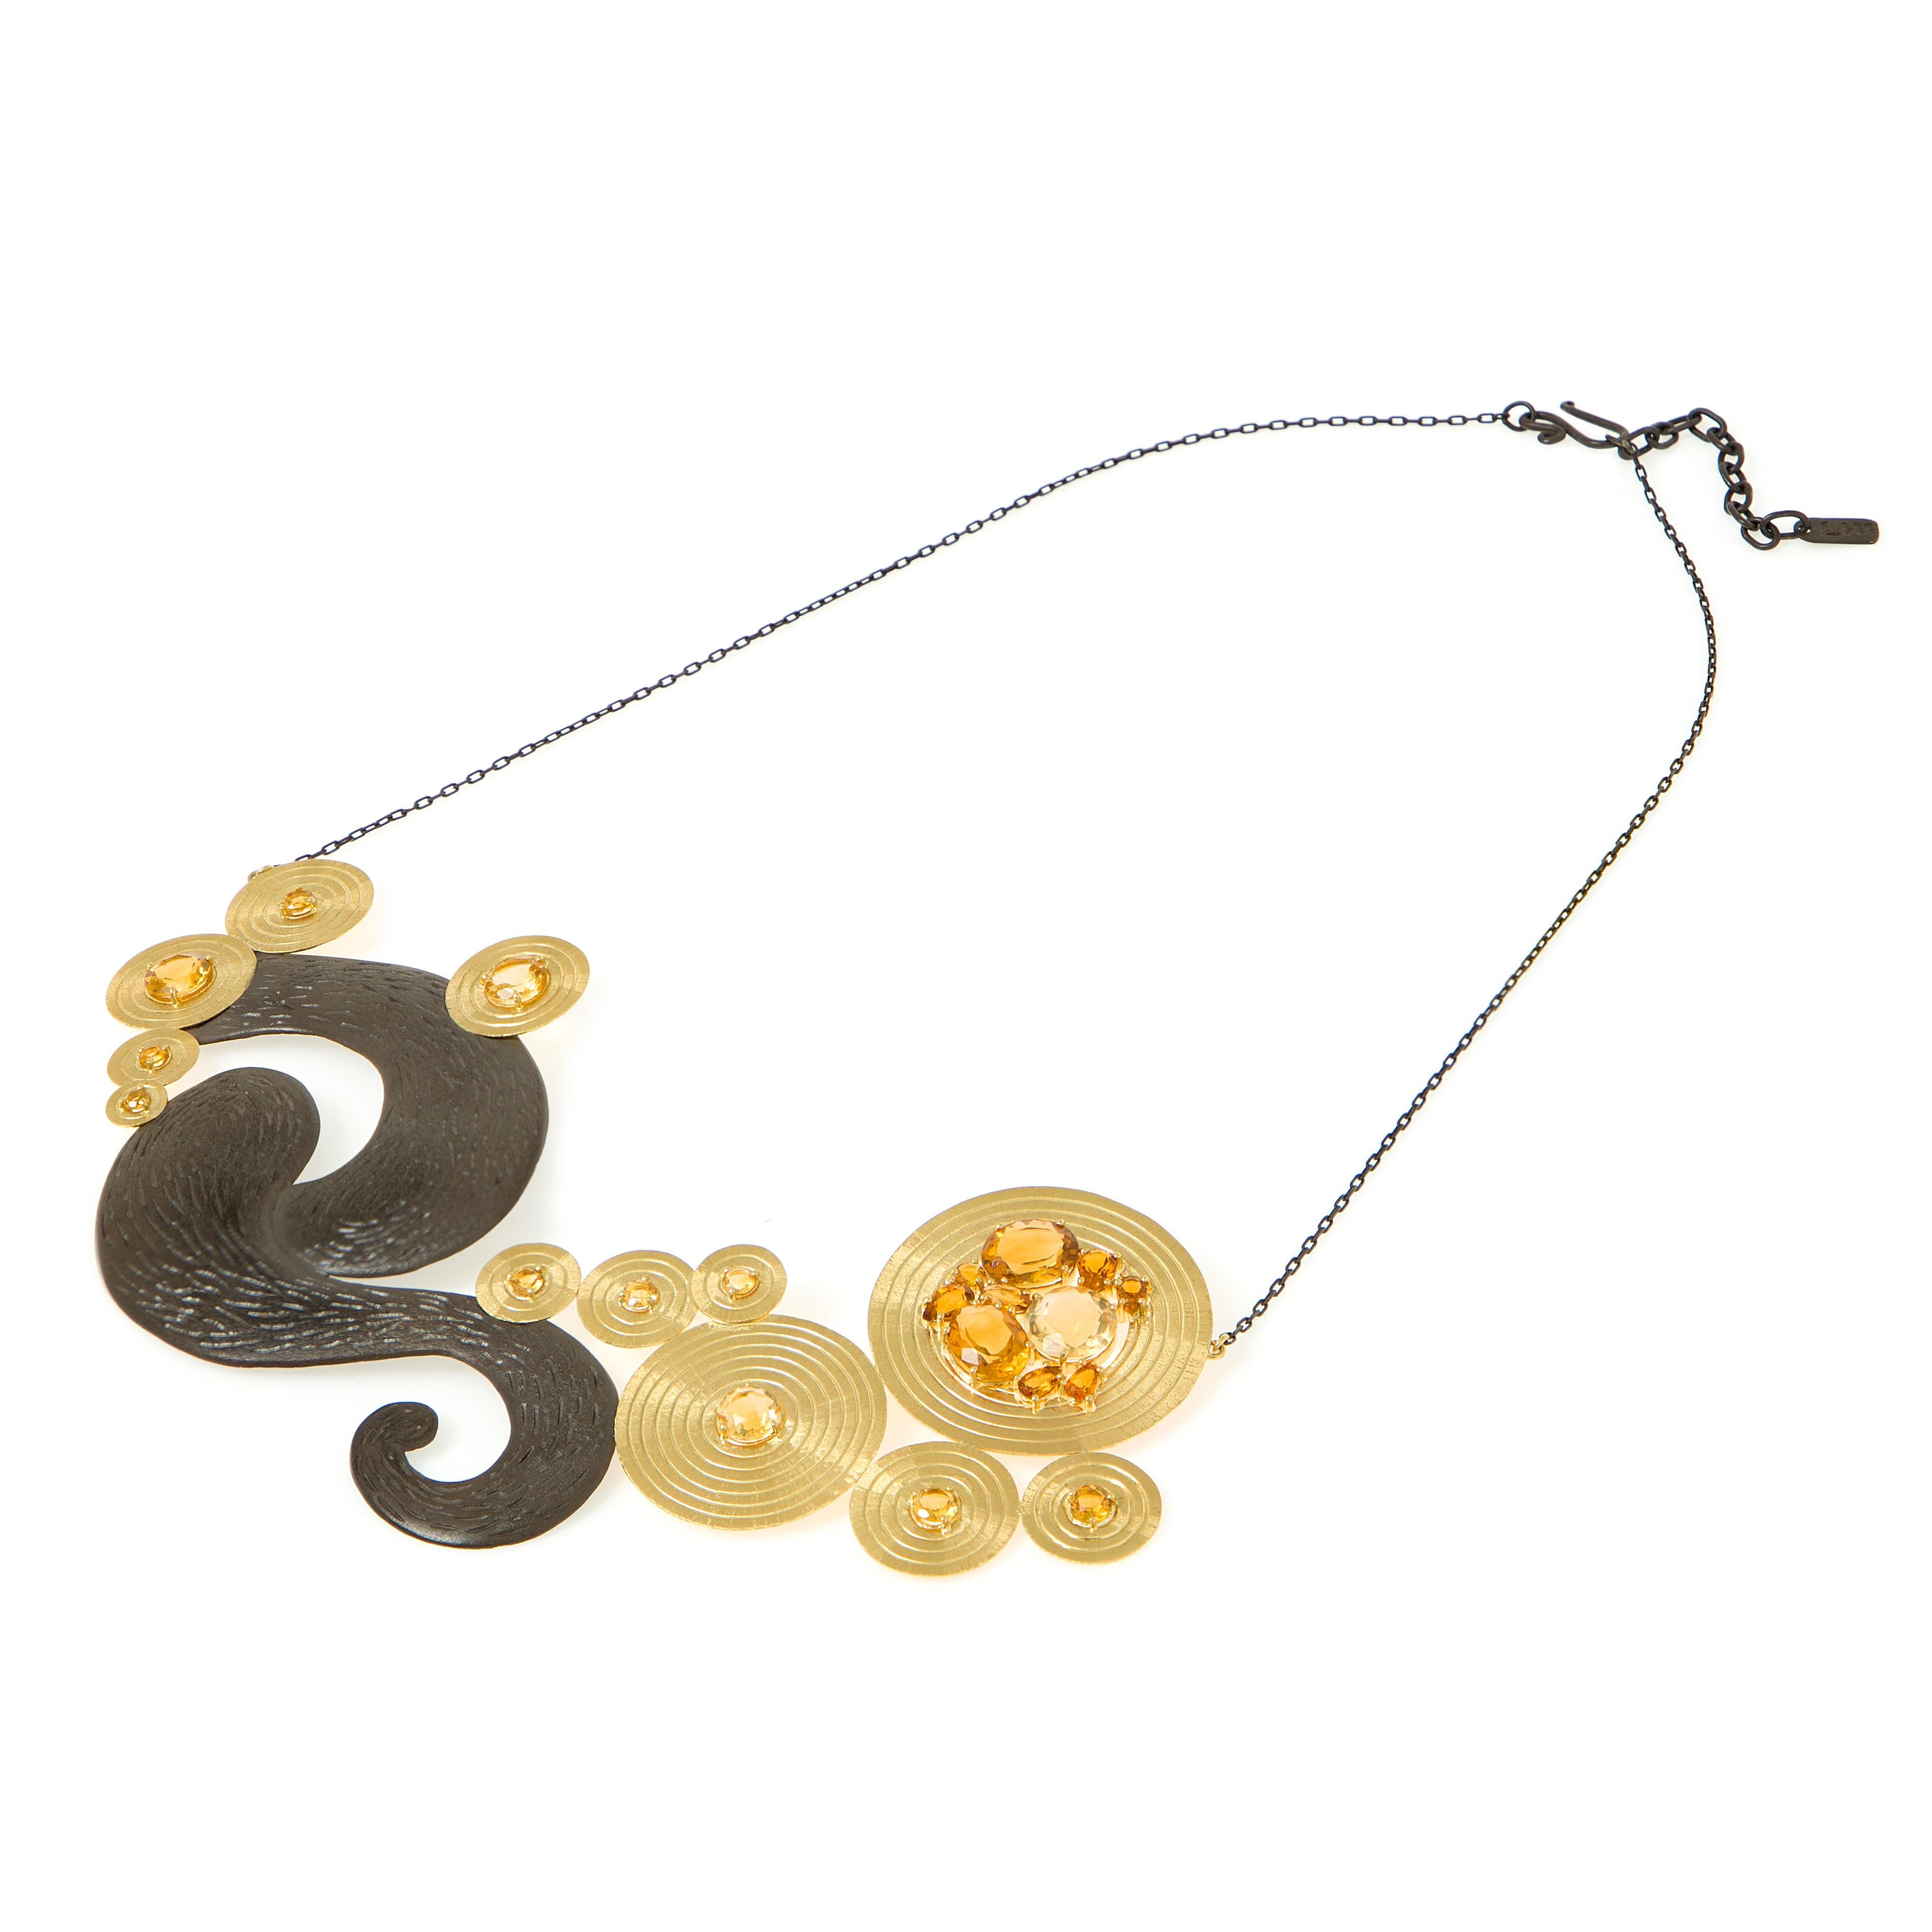 Necklace
Gold 18K, Silver 95O
Light Citrine and Dark Citrine
Handmade, bright polished, matte finish and prong setting

This necklace is inspired by Van Gogh’s “Starry Night”.  Carved gold circles with citrines represent the light emanating from the